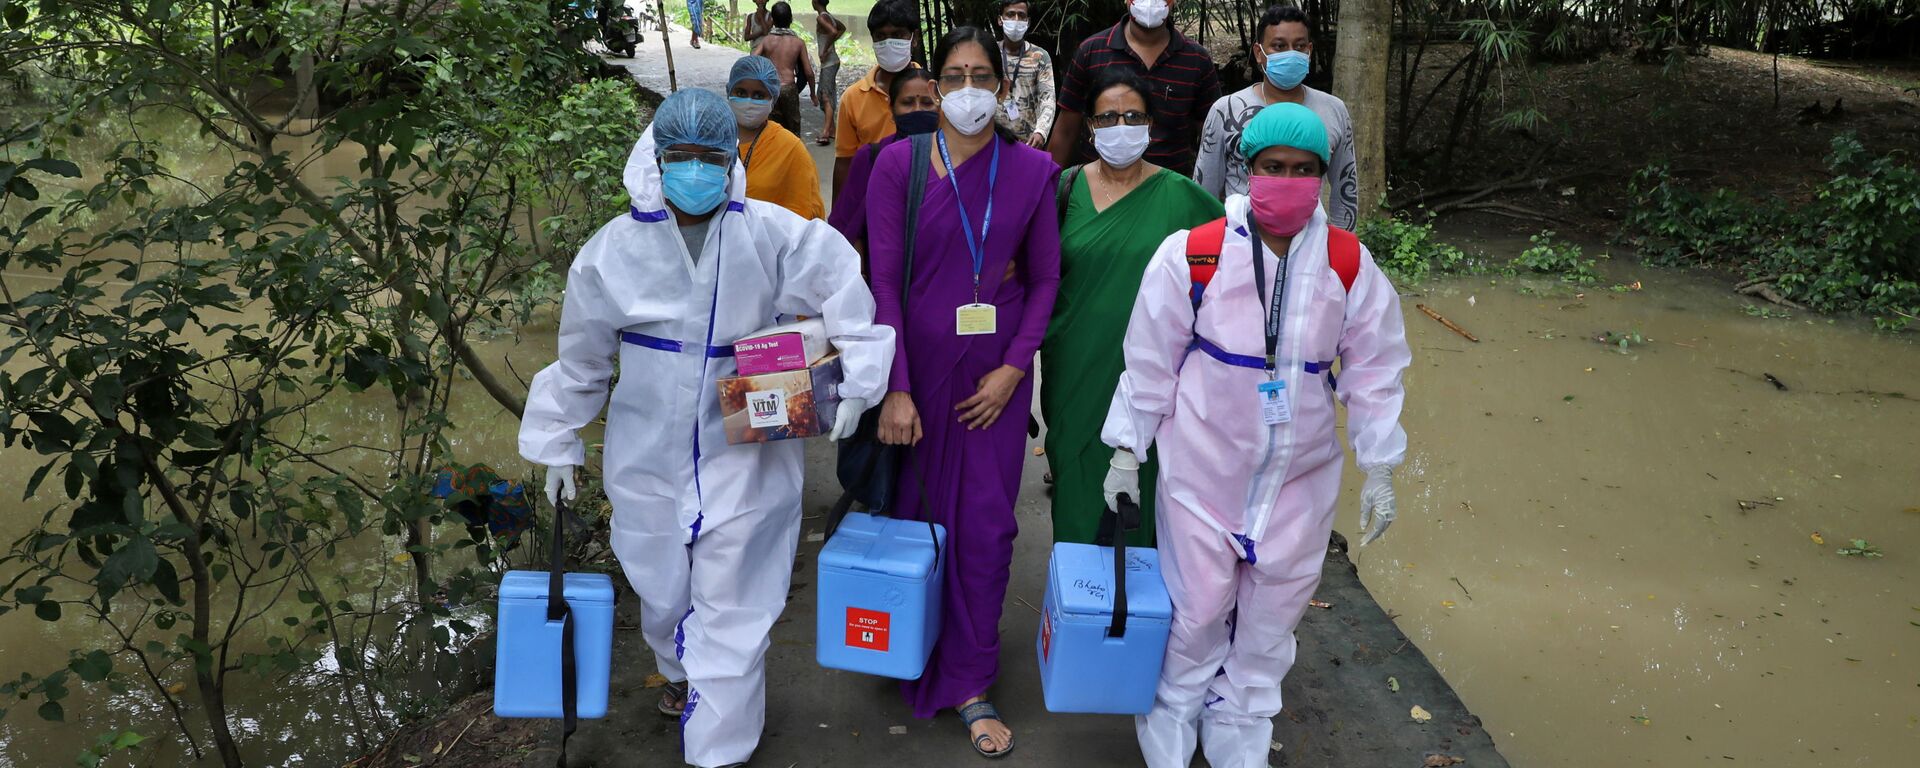 Healthcare workers carry COVISHIELD vaccine, a coronavirus disease (COVID-19) vaccine manufactured by Serum Institute of India, to inoculate villagers during a door-to-door vaccination and testing drive at Uttar Batora Island in Howrah district in West Bengal state, India, June 21, 2021 - Sputnik International, 1920, 26.06.2021